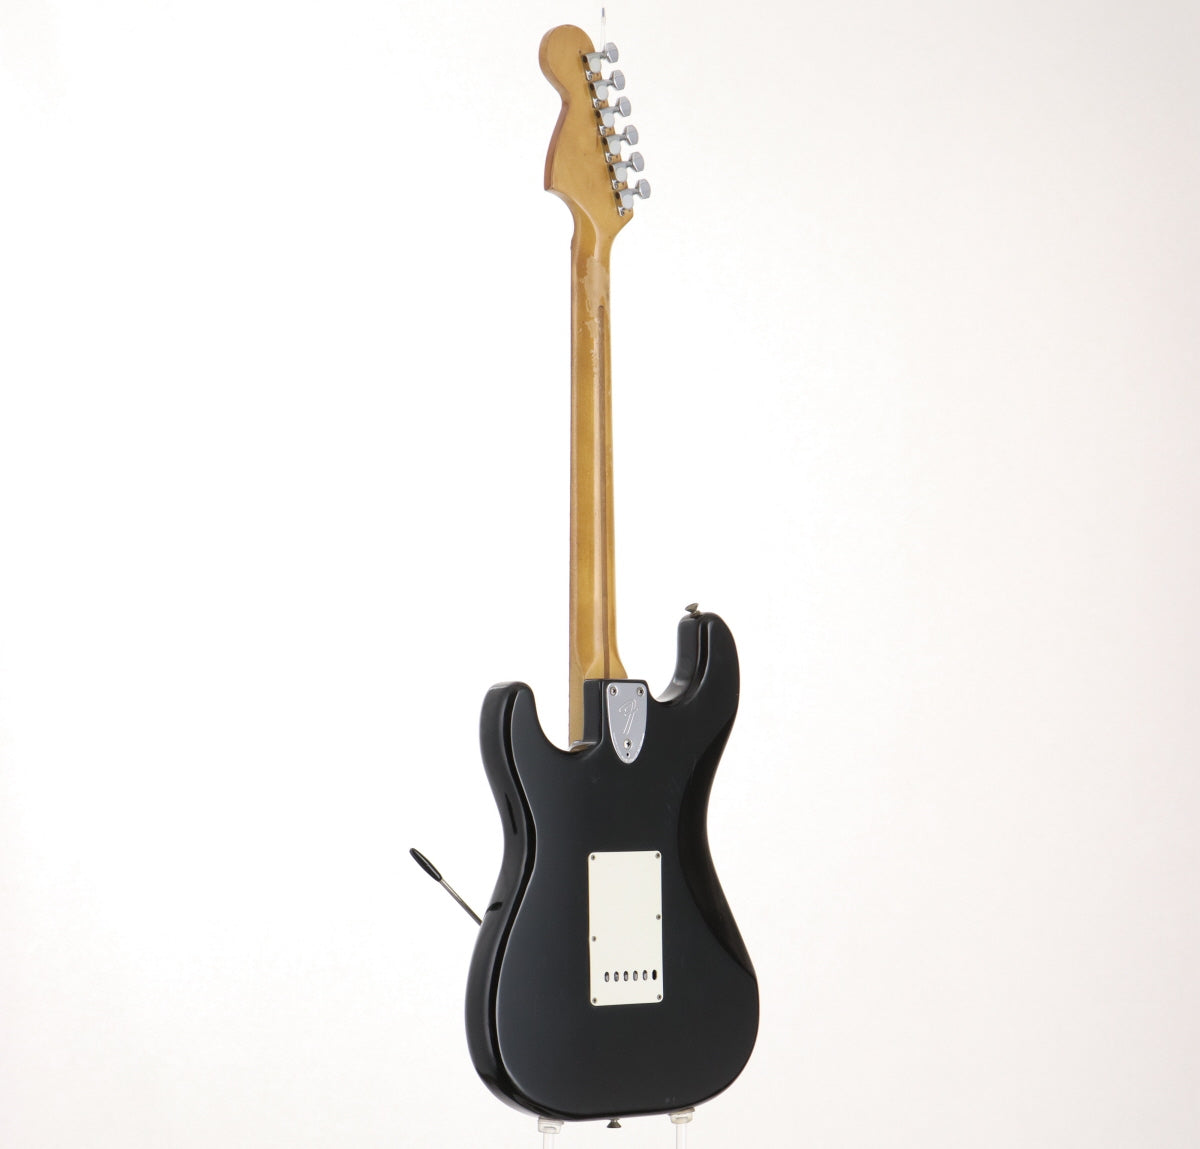 [SN S780938] USED Fender / 1978 Stratocaster Modified Black Rosewood Fingerboard [06]